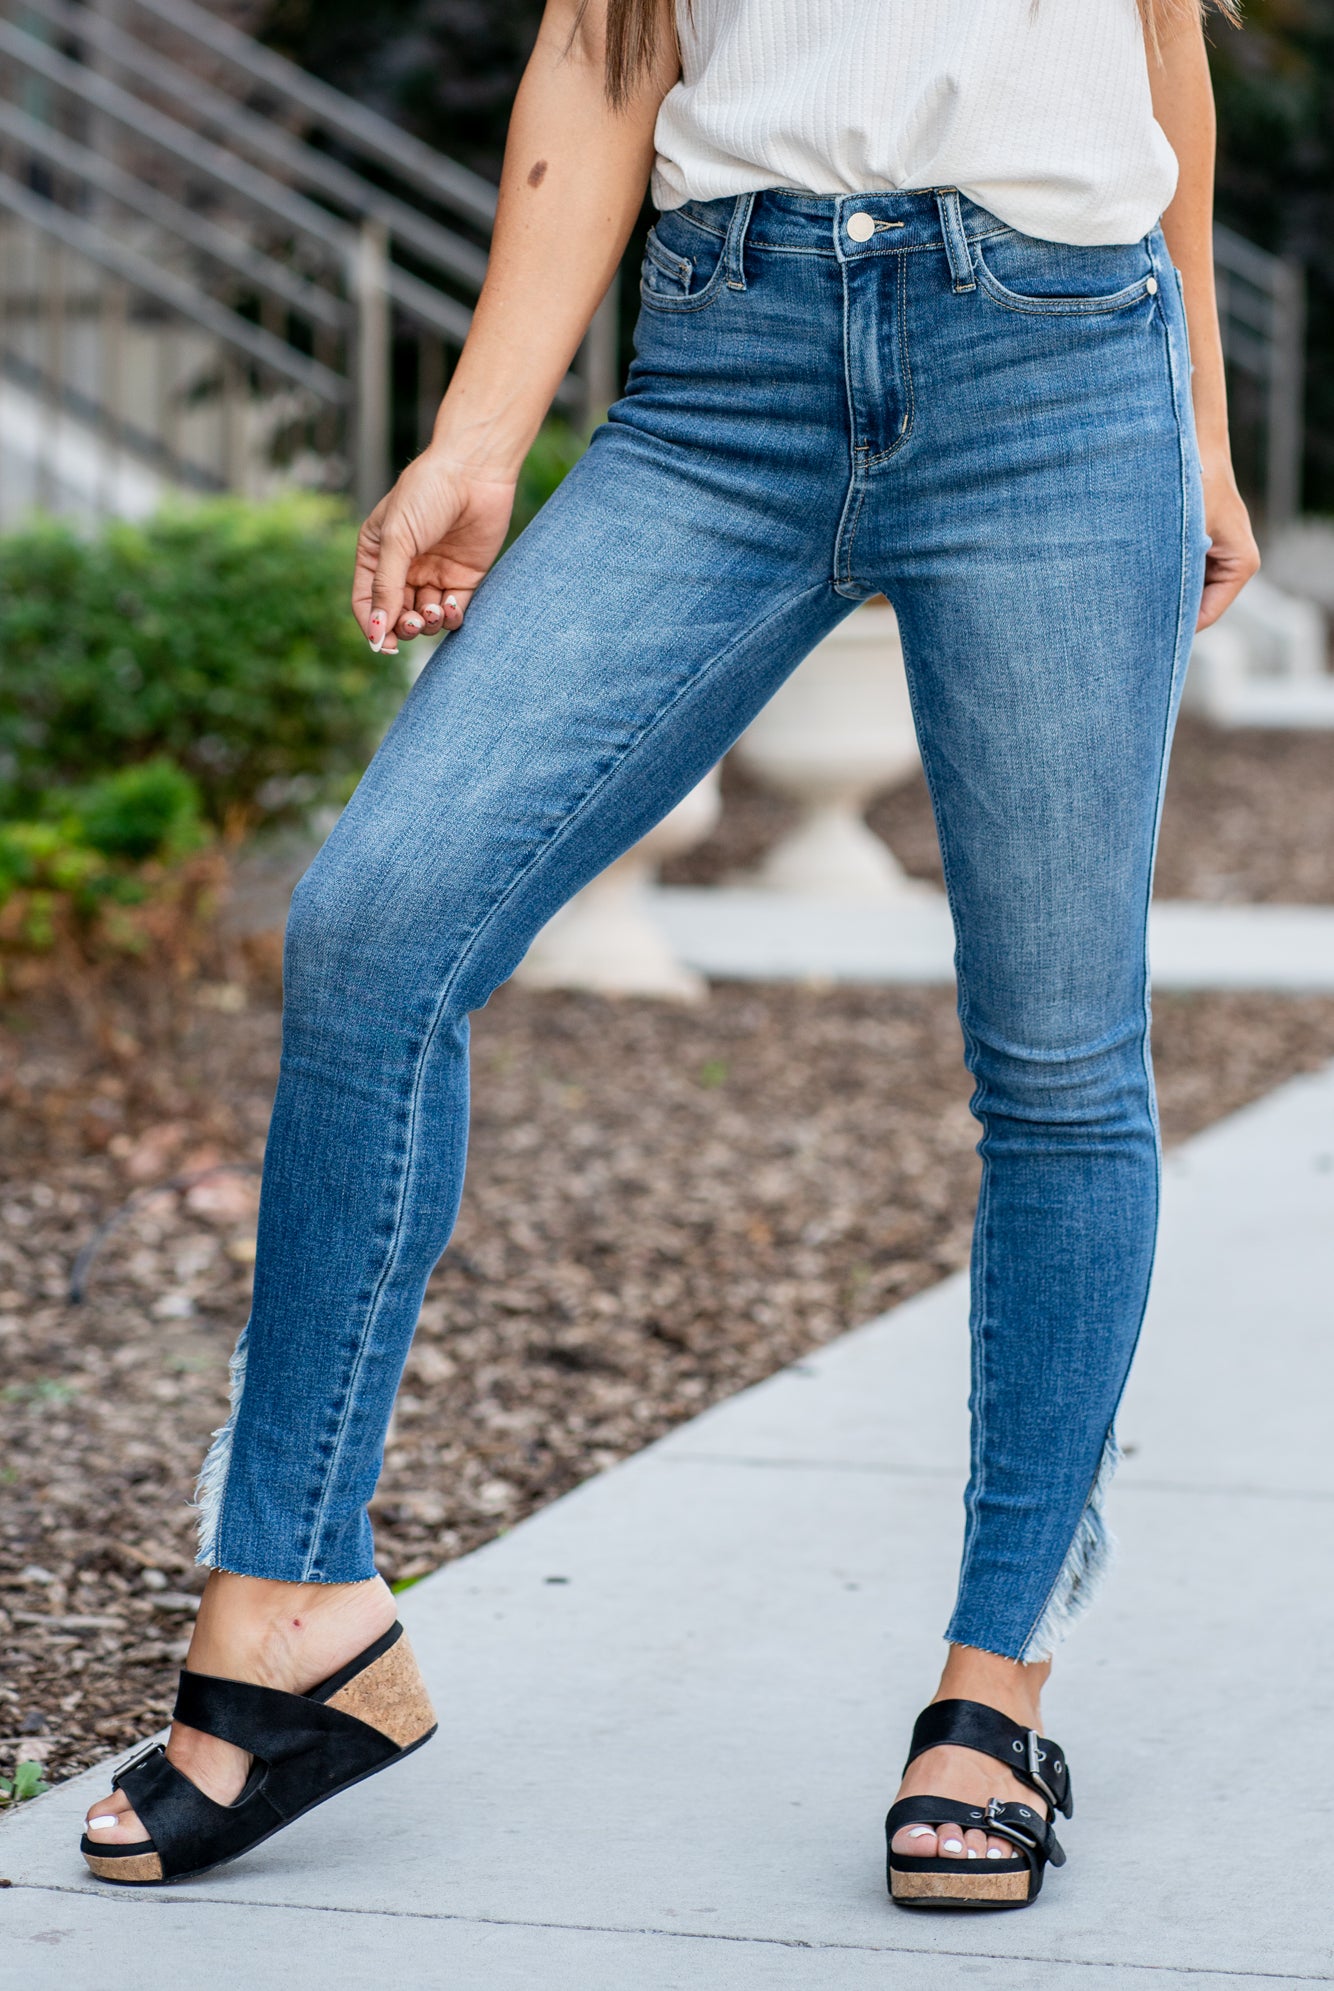 Judy Blue  Don't be afraid to wear high-waisted jeans with a medium blue wash and split hem detail, these will be your everyday go-to denim.   Color: Medium Wash Cut: Skinny, 28.5" Inseam*  Rise: High Rise 10.5" Front Rise* Material: 93% Cotton, 6% Polyester, 1% Spandex Machine Wash Separately In Cold Water Stitching: Classic Fly: Zipper Style #: JB88459-PL | 88459-PL *Measured on the smallest size, measurements may vary by size.  Contact us for any additional measurements or sizing.